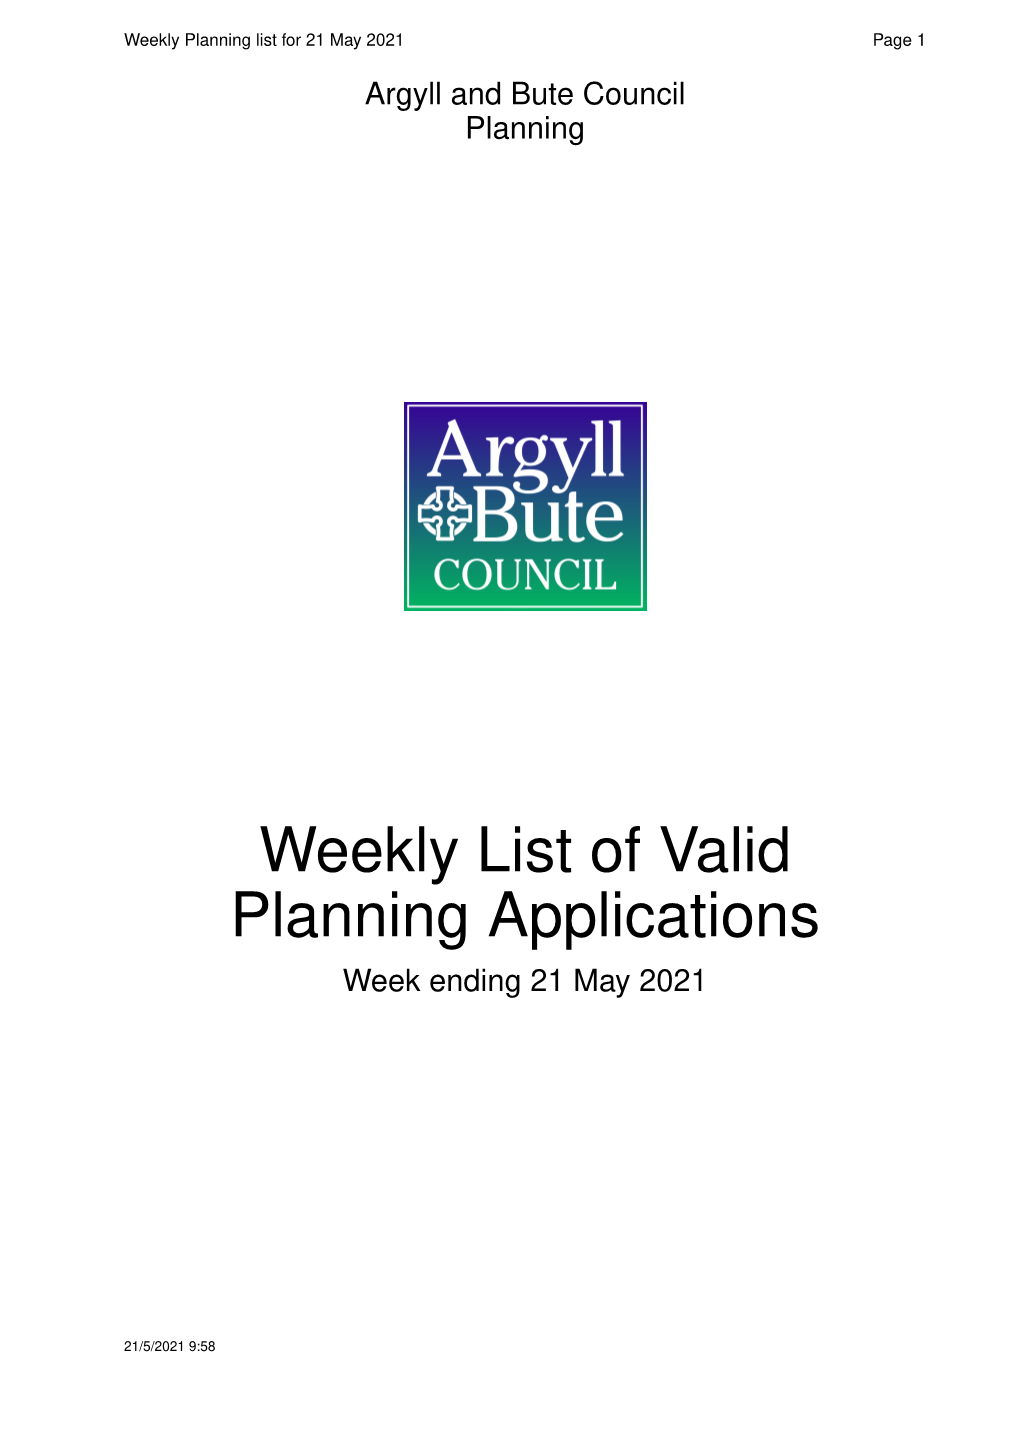 Weekly List of Valid Planning Applications 21St May 2021.Pdf